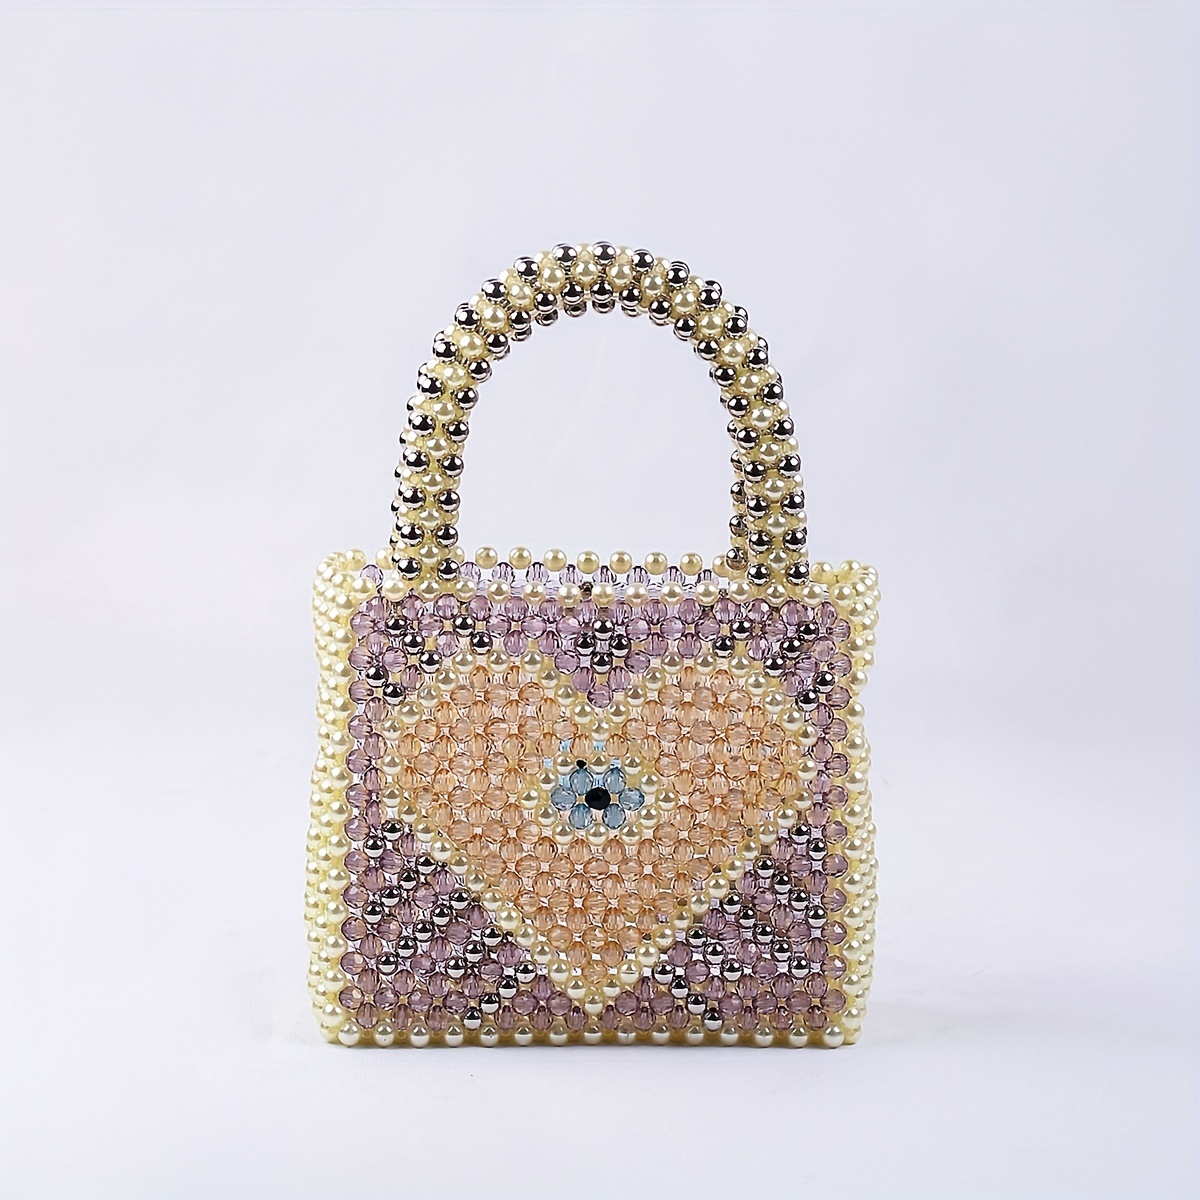 Slighly-Less-Than-Perfect Square Weave - Magnetic Bag Closure – bringberry  Handbag Hardware and Designs